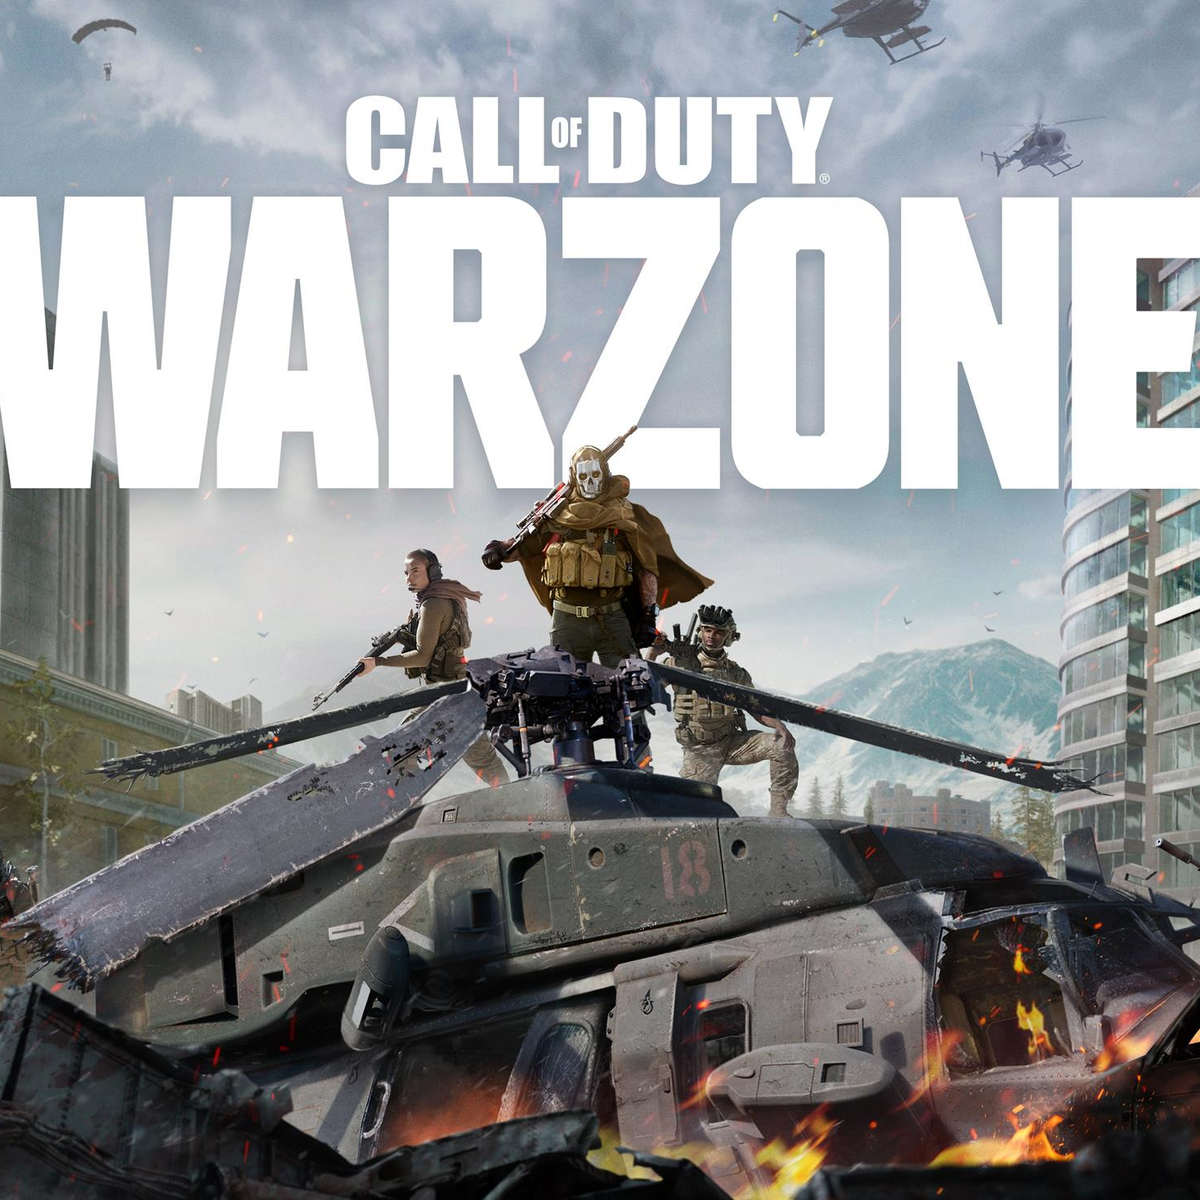 Introducing The Store! New on Warzone Tracker - COD Warzone Tracker